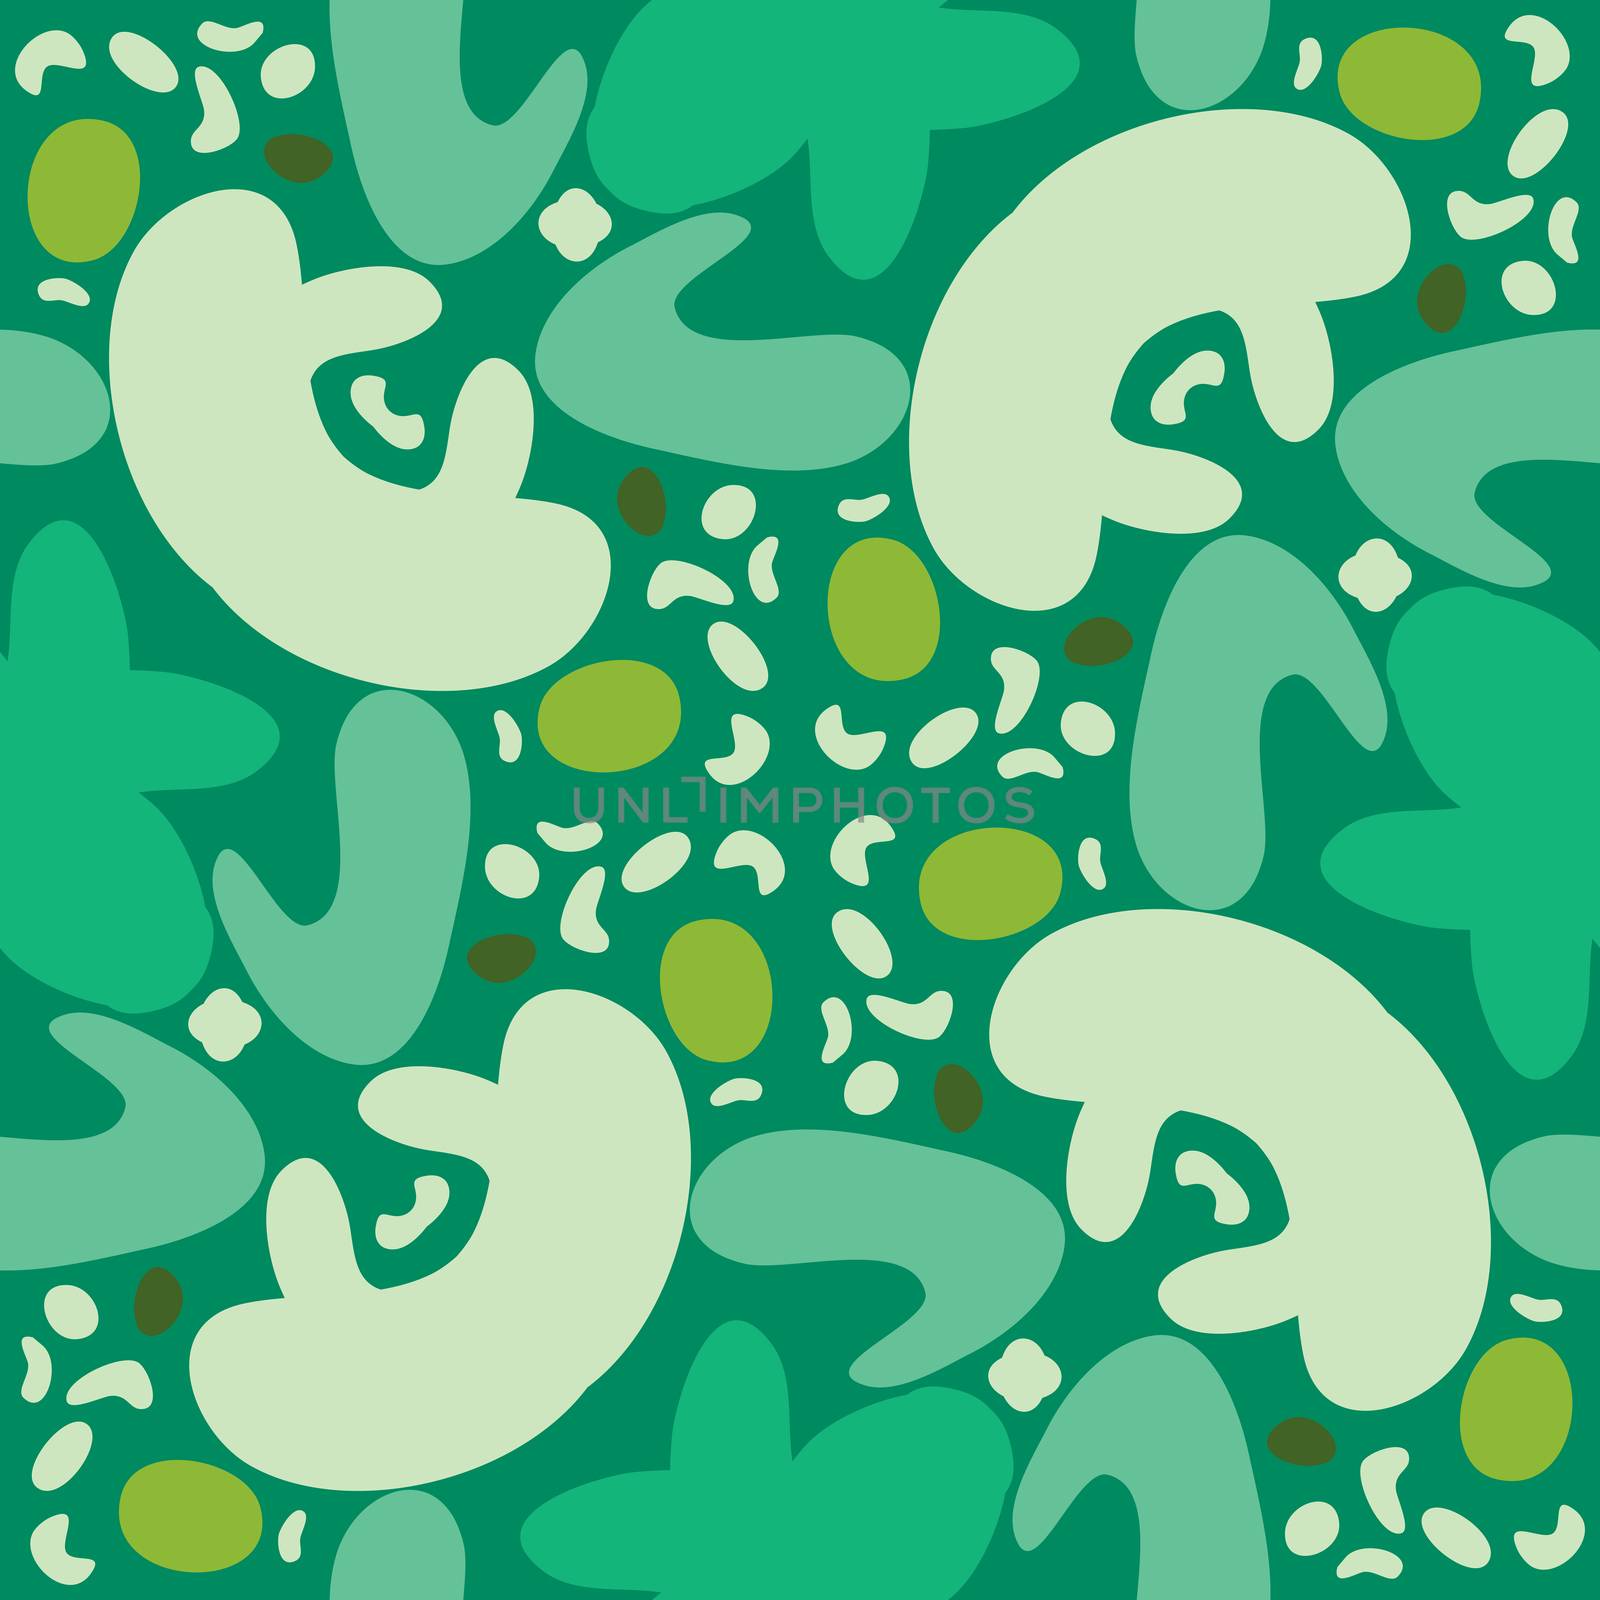 Repeating pattern background of green organic shapes